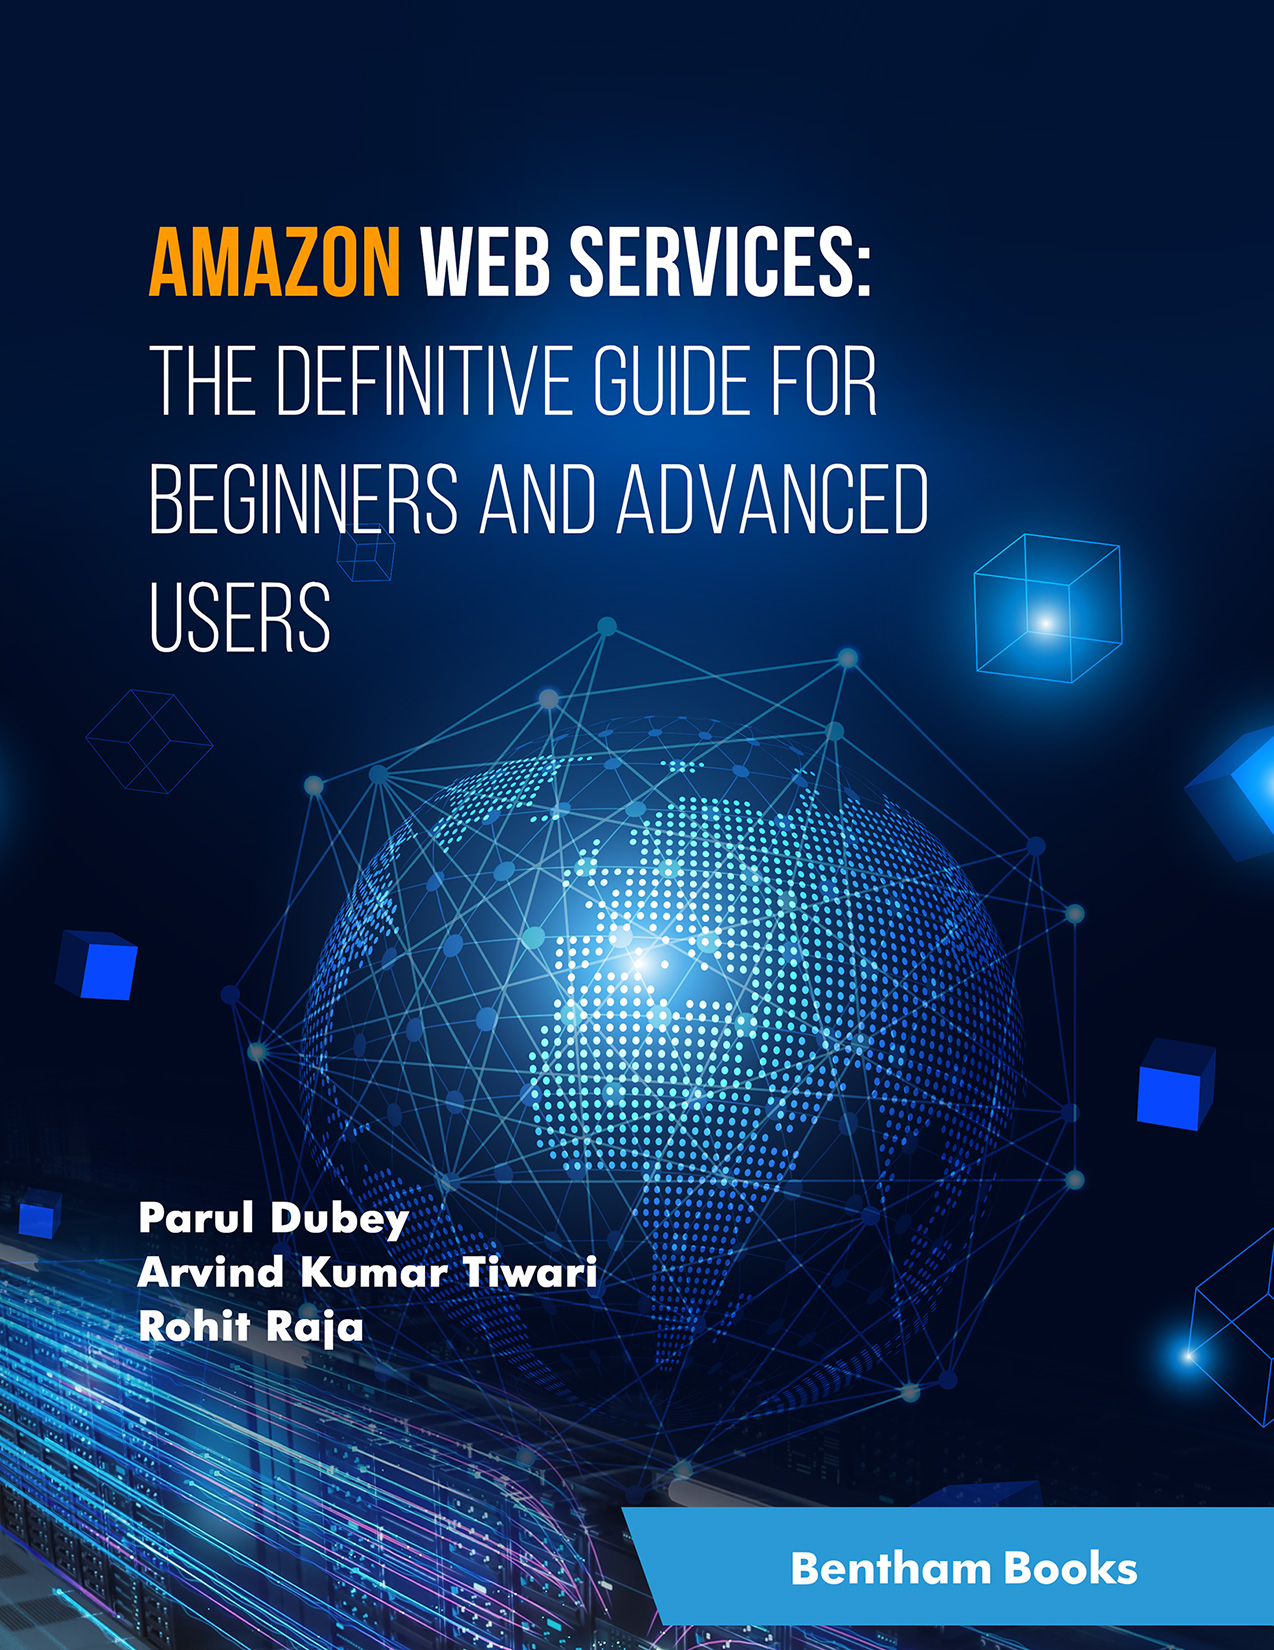 Amazon Web Services: The Definitive Guide for Beginners and Advanced Users